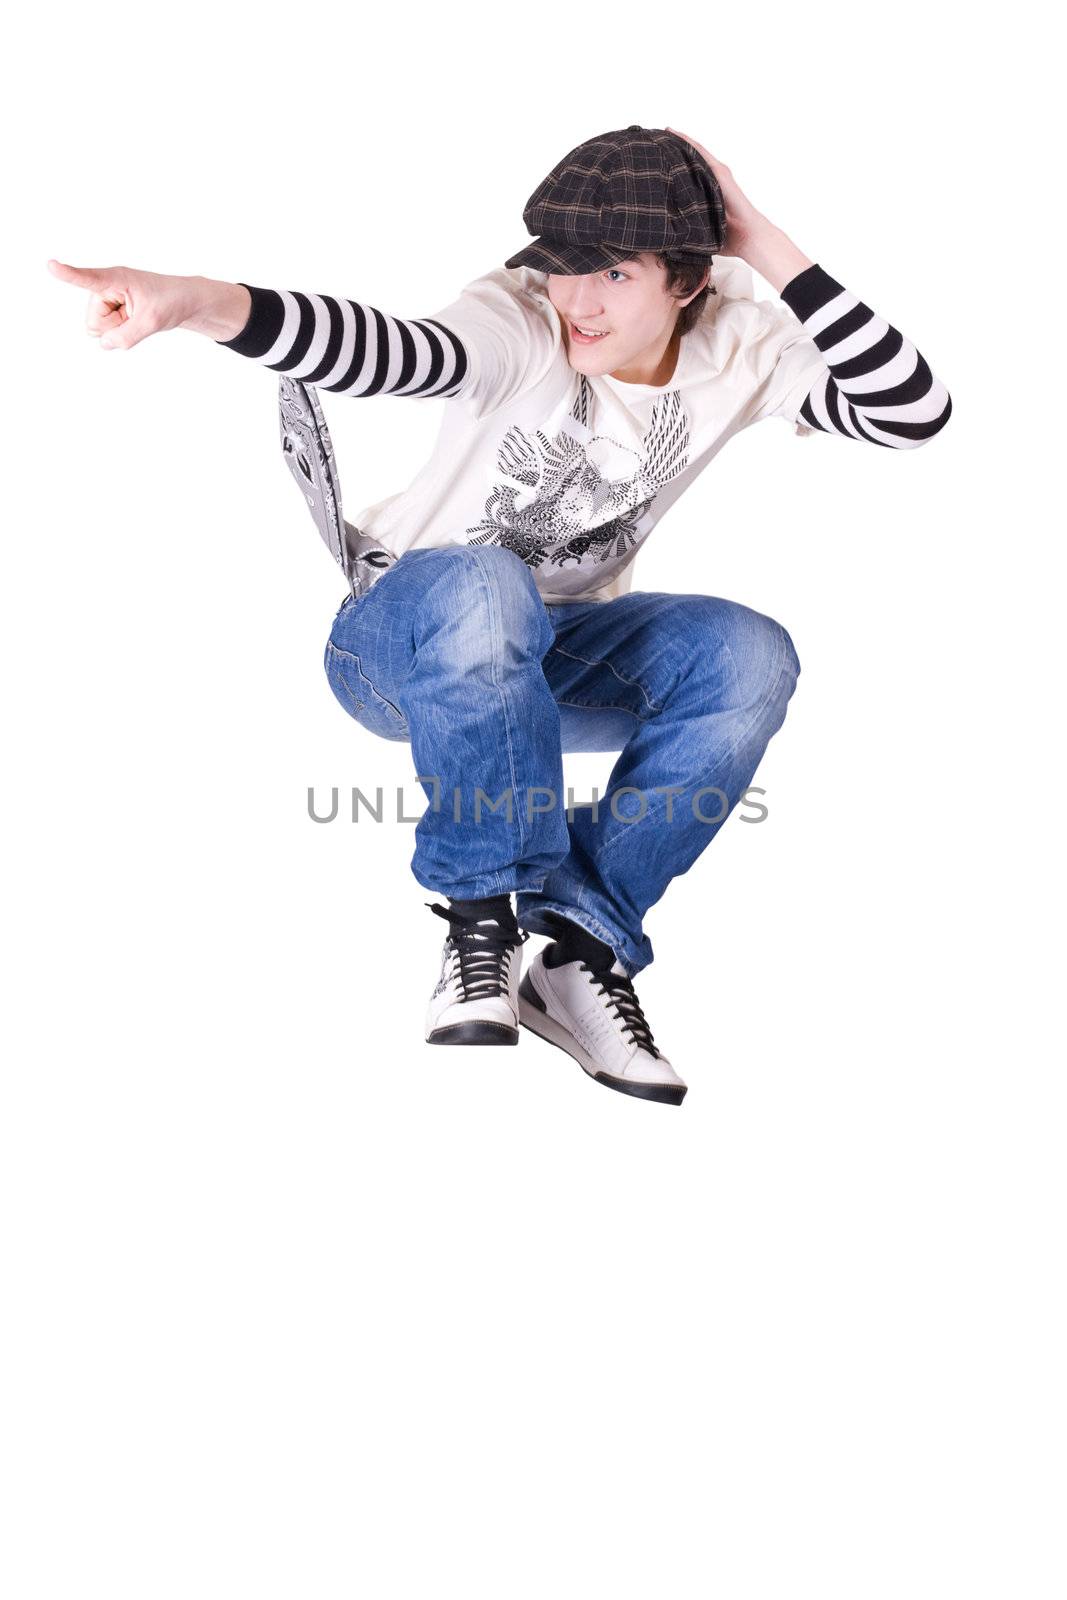 Teenage boy jumping and dancing Locking or Hip-hop dance over isolated background